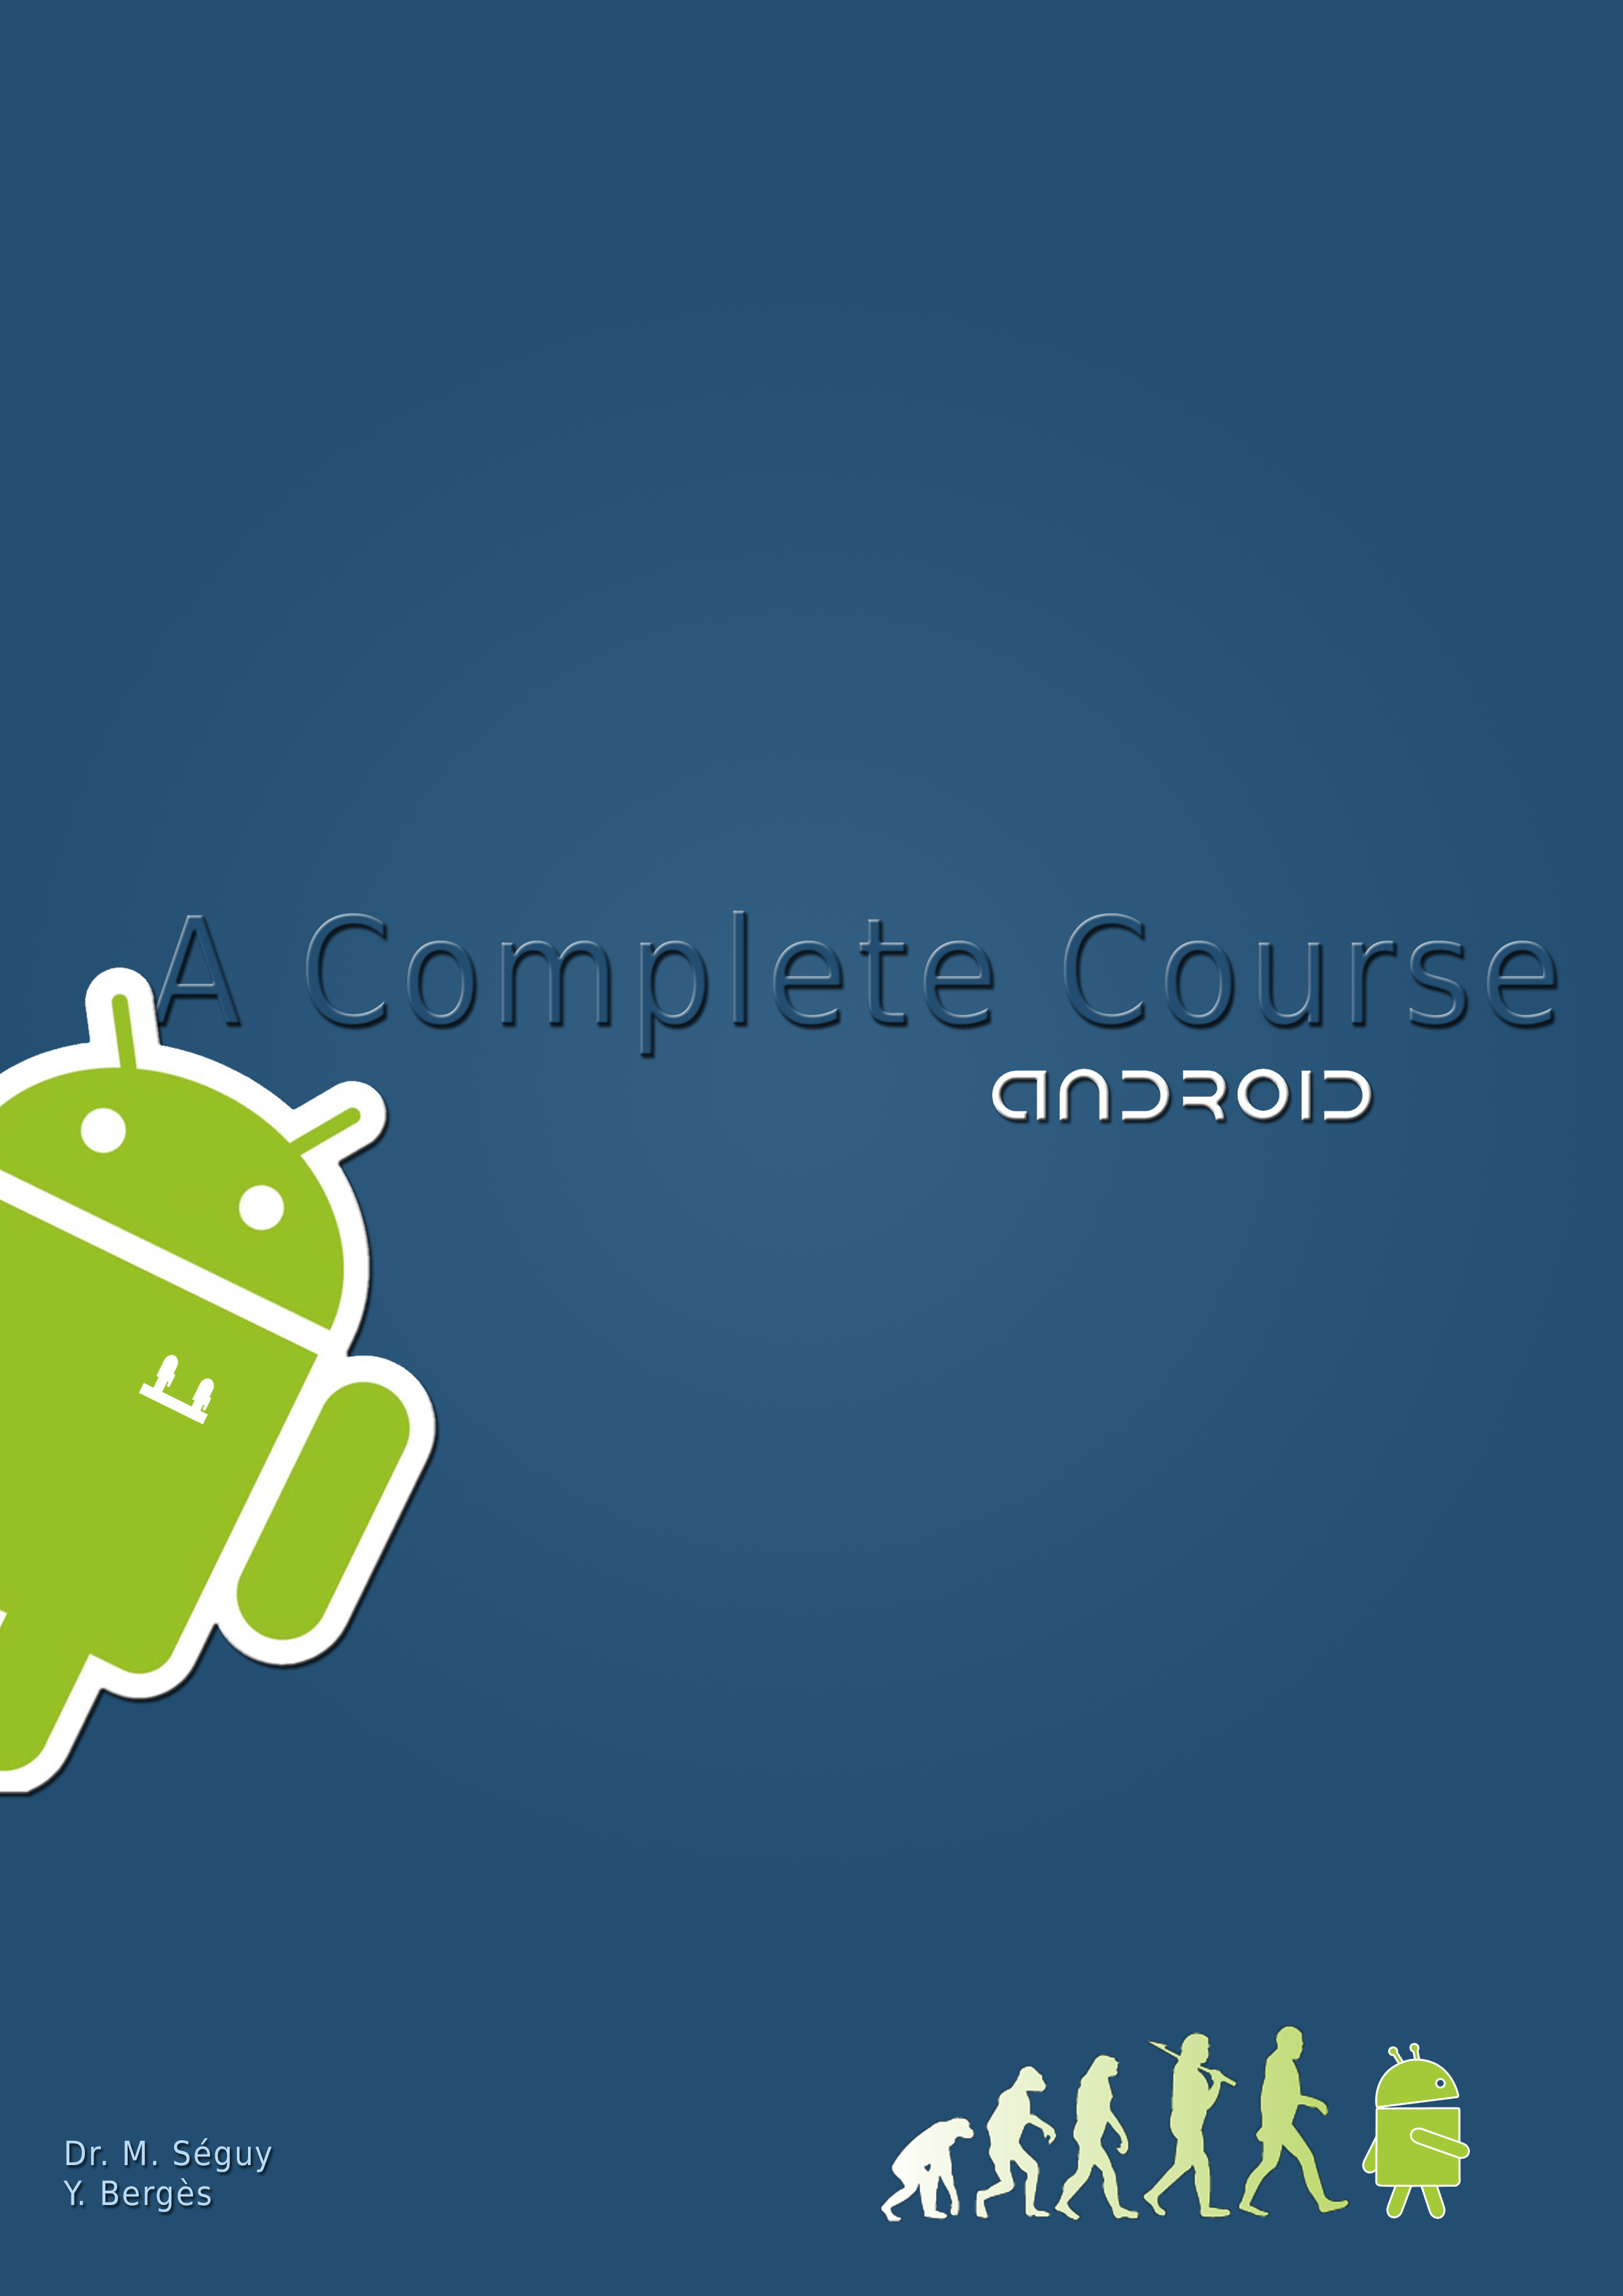 Android, A Complete Course, From Basics To Enterprise Edition